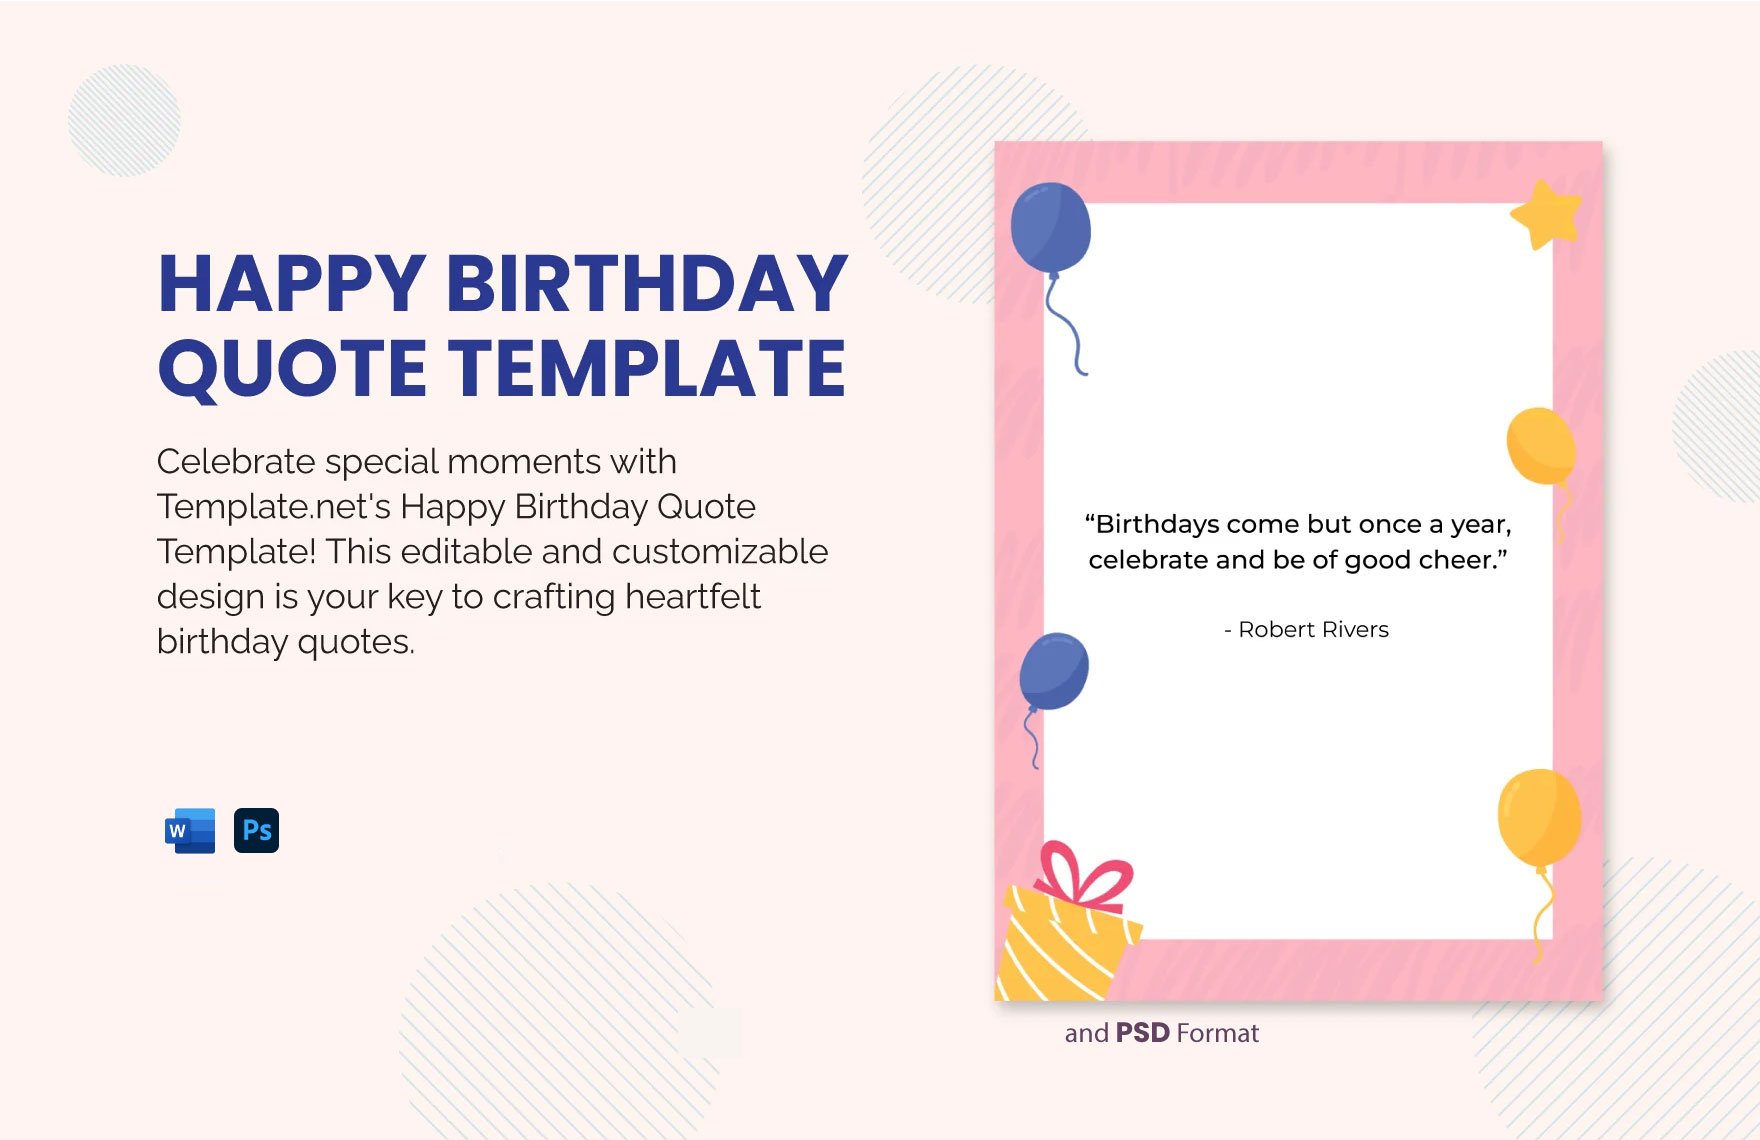 Happy Birthday Quote Template in Word, PSD